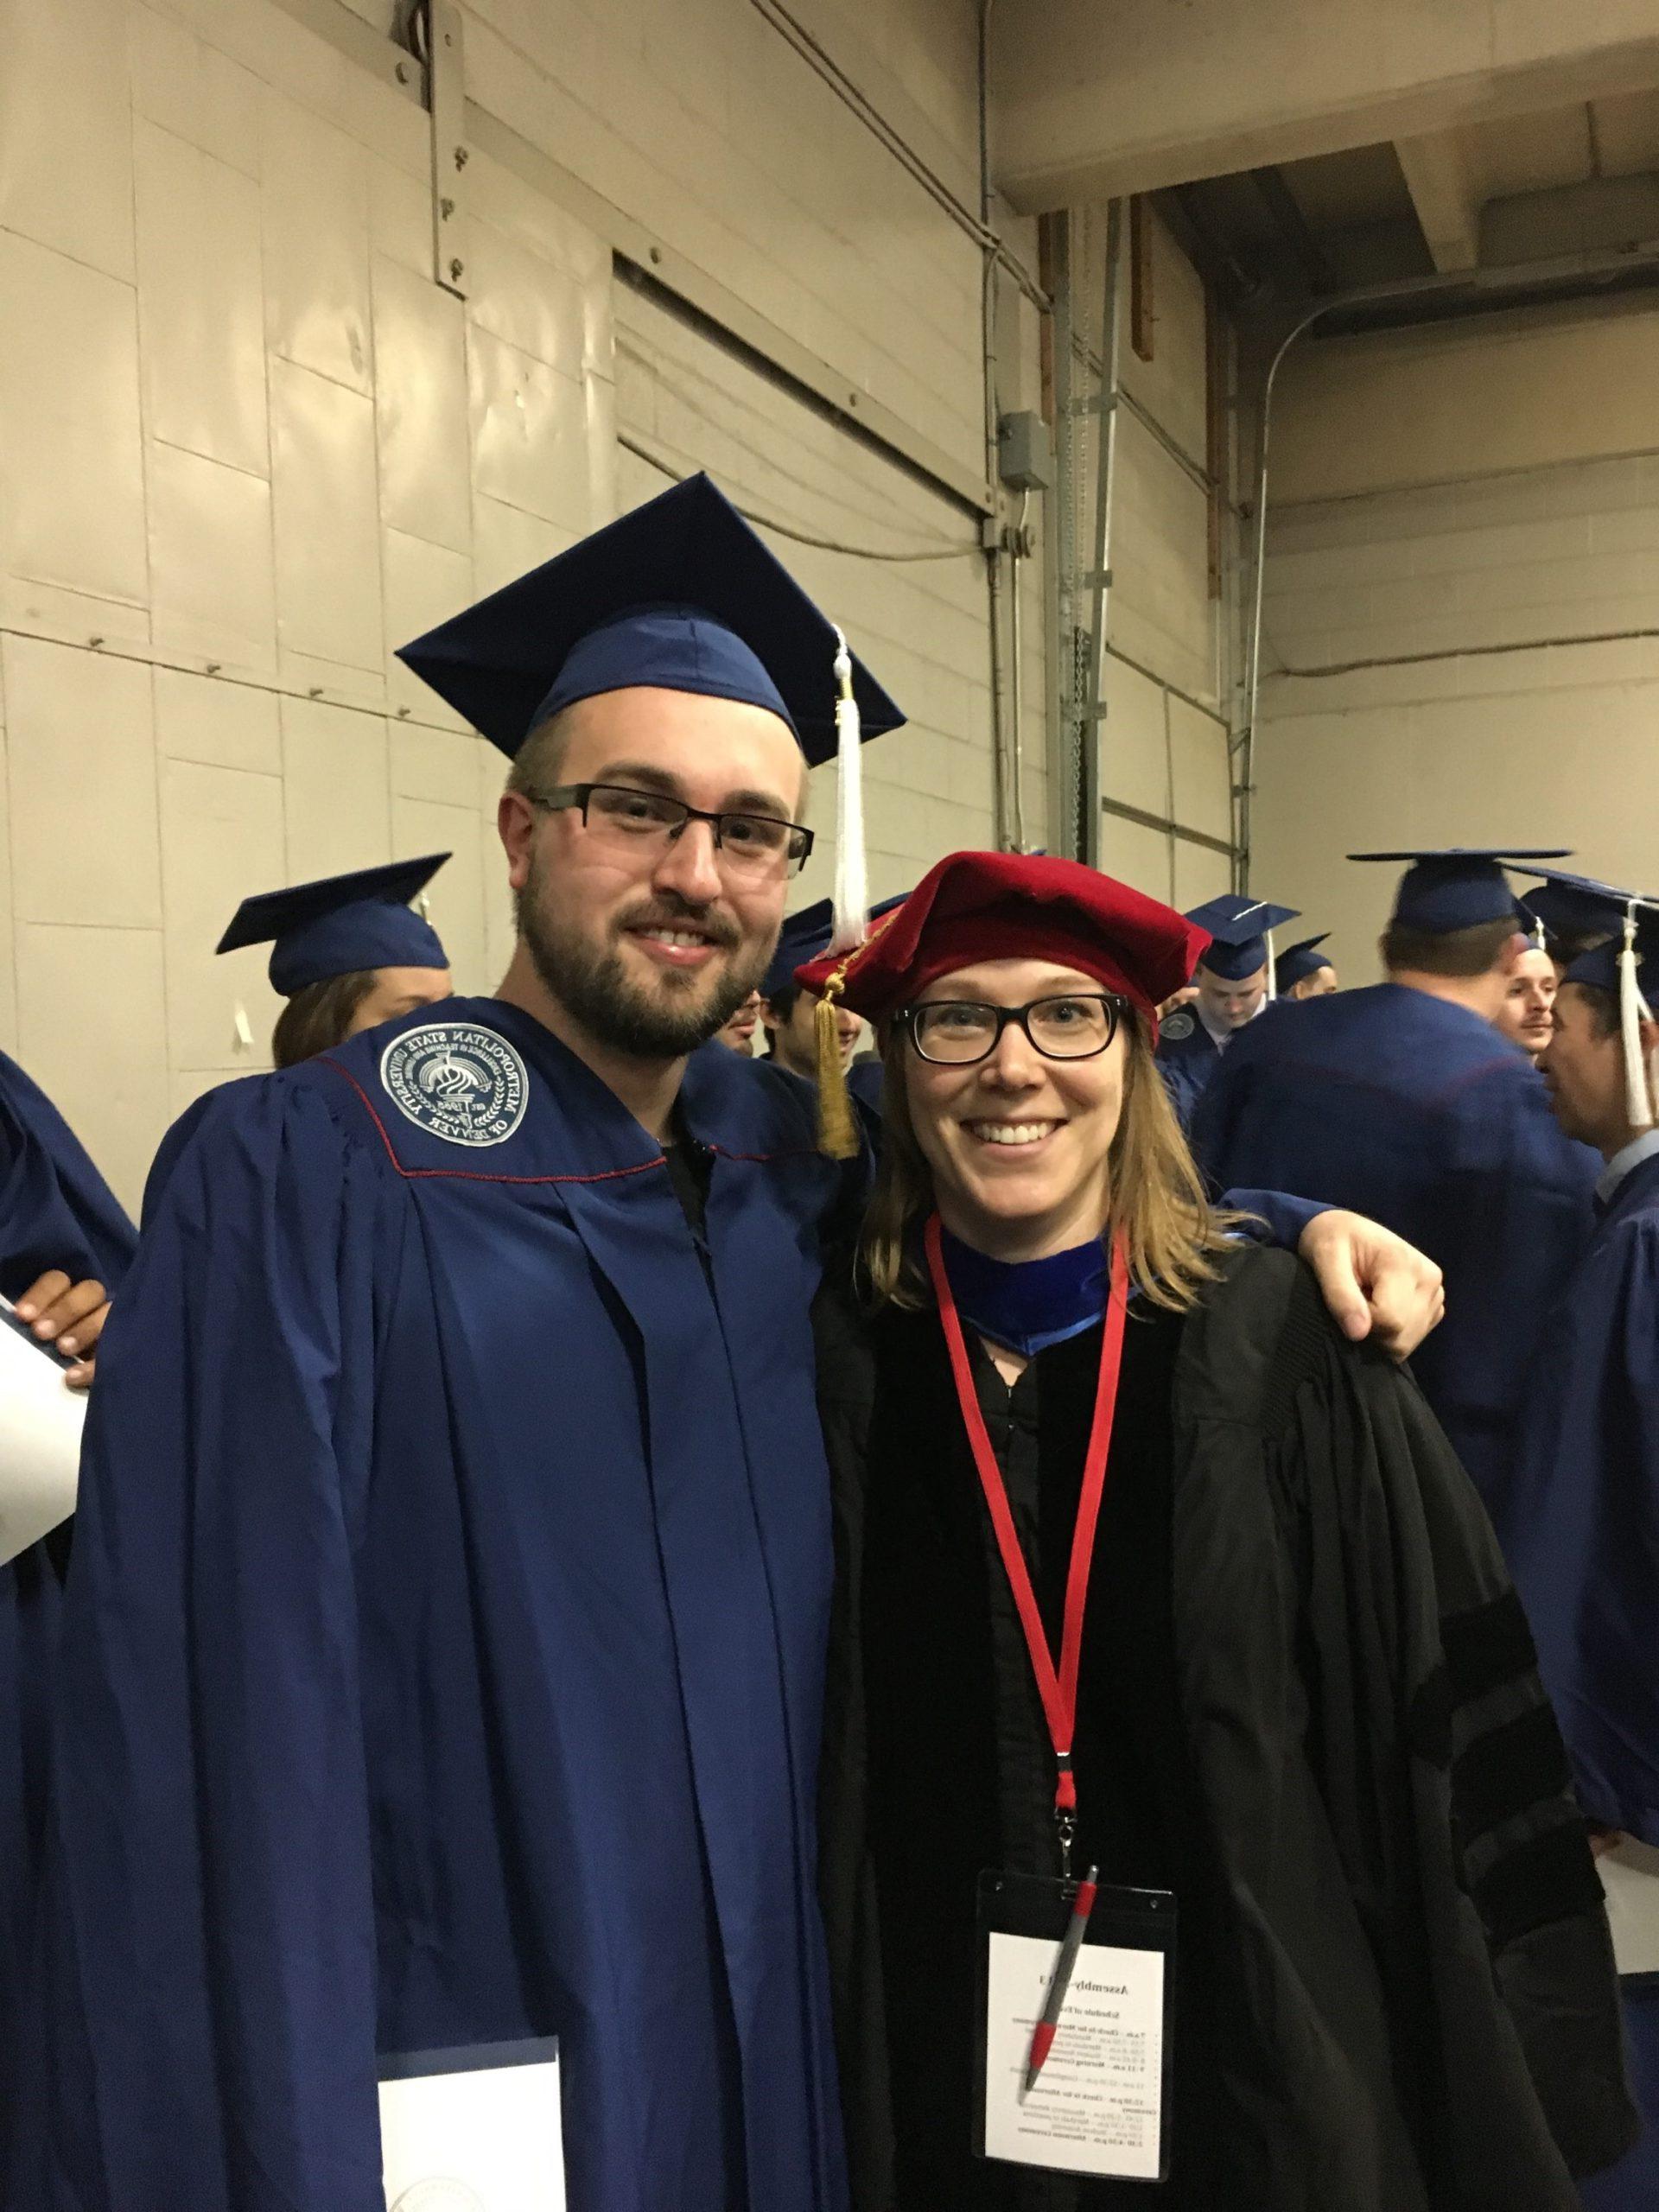 Cody Griffith in a cap and gown, posing with a professor